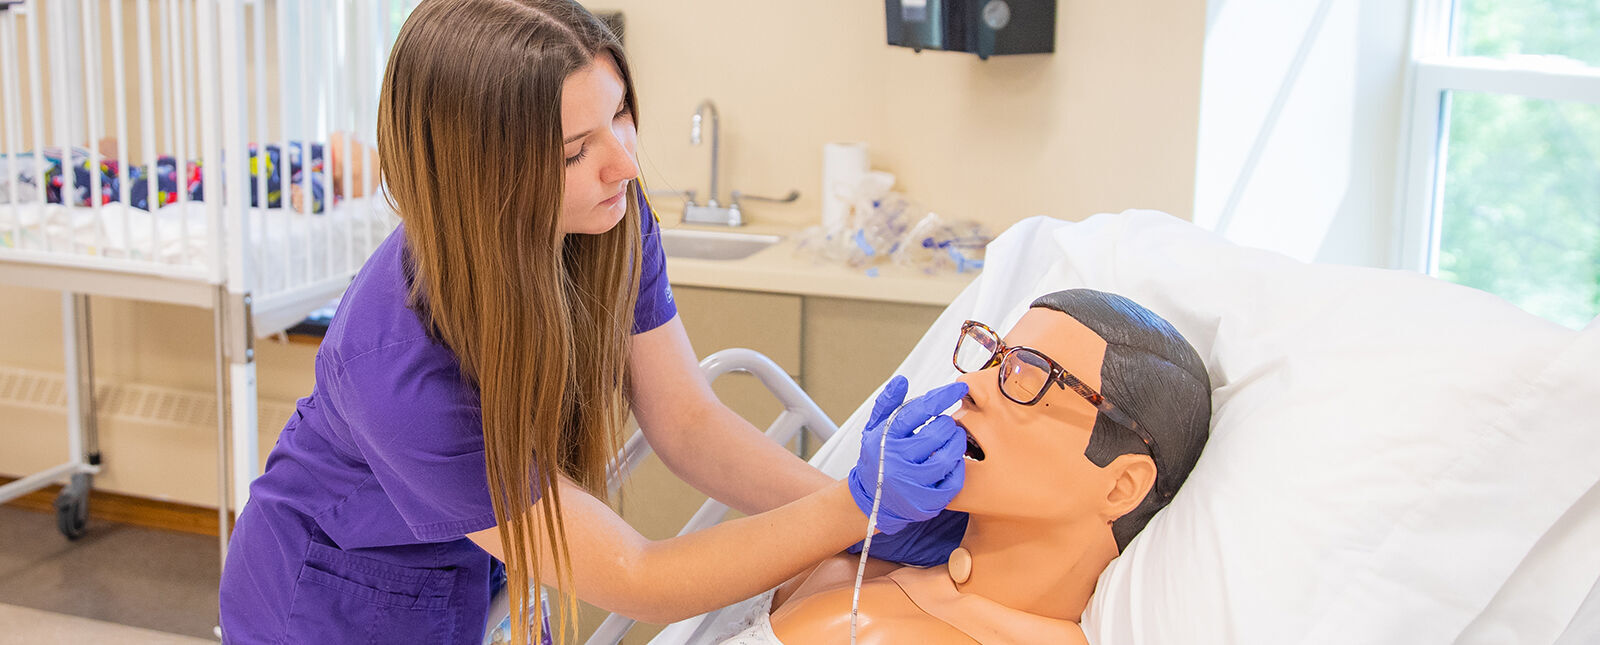 A female Nursing student practices an examination on a dummy